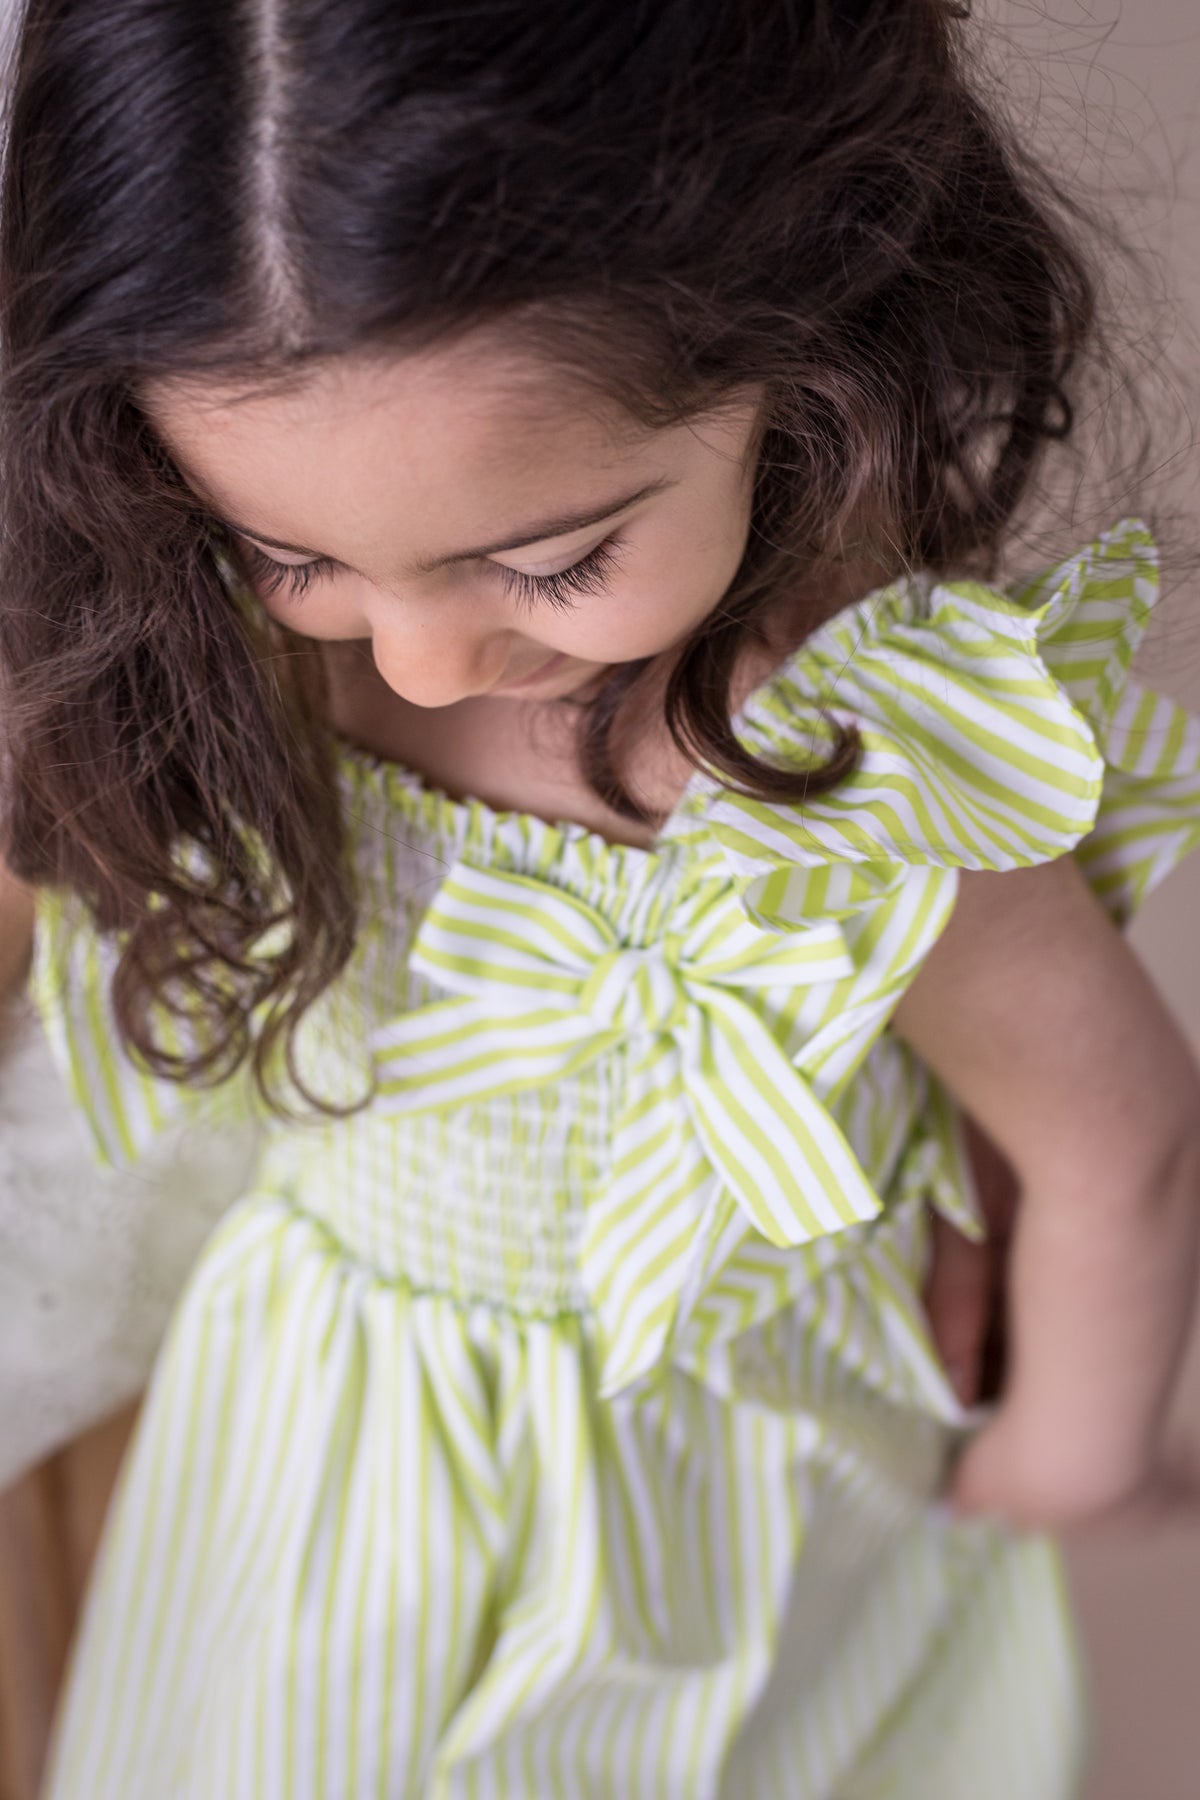 young child in a green and white dress looks down